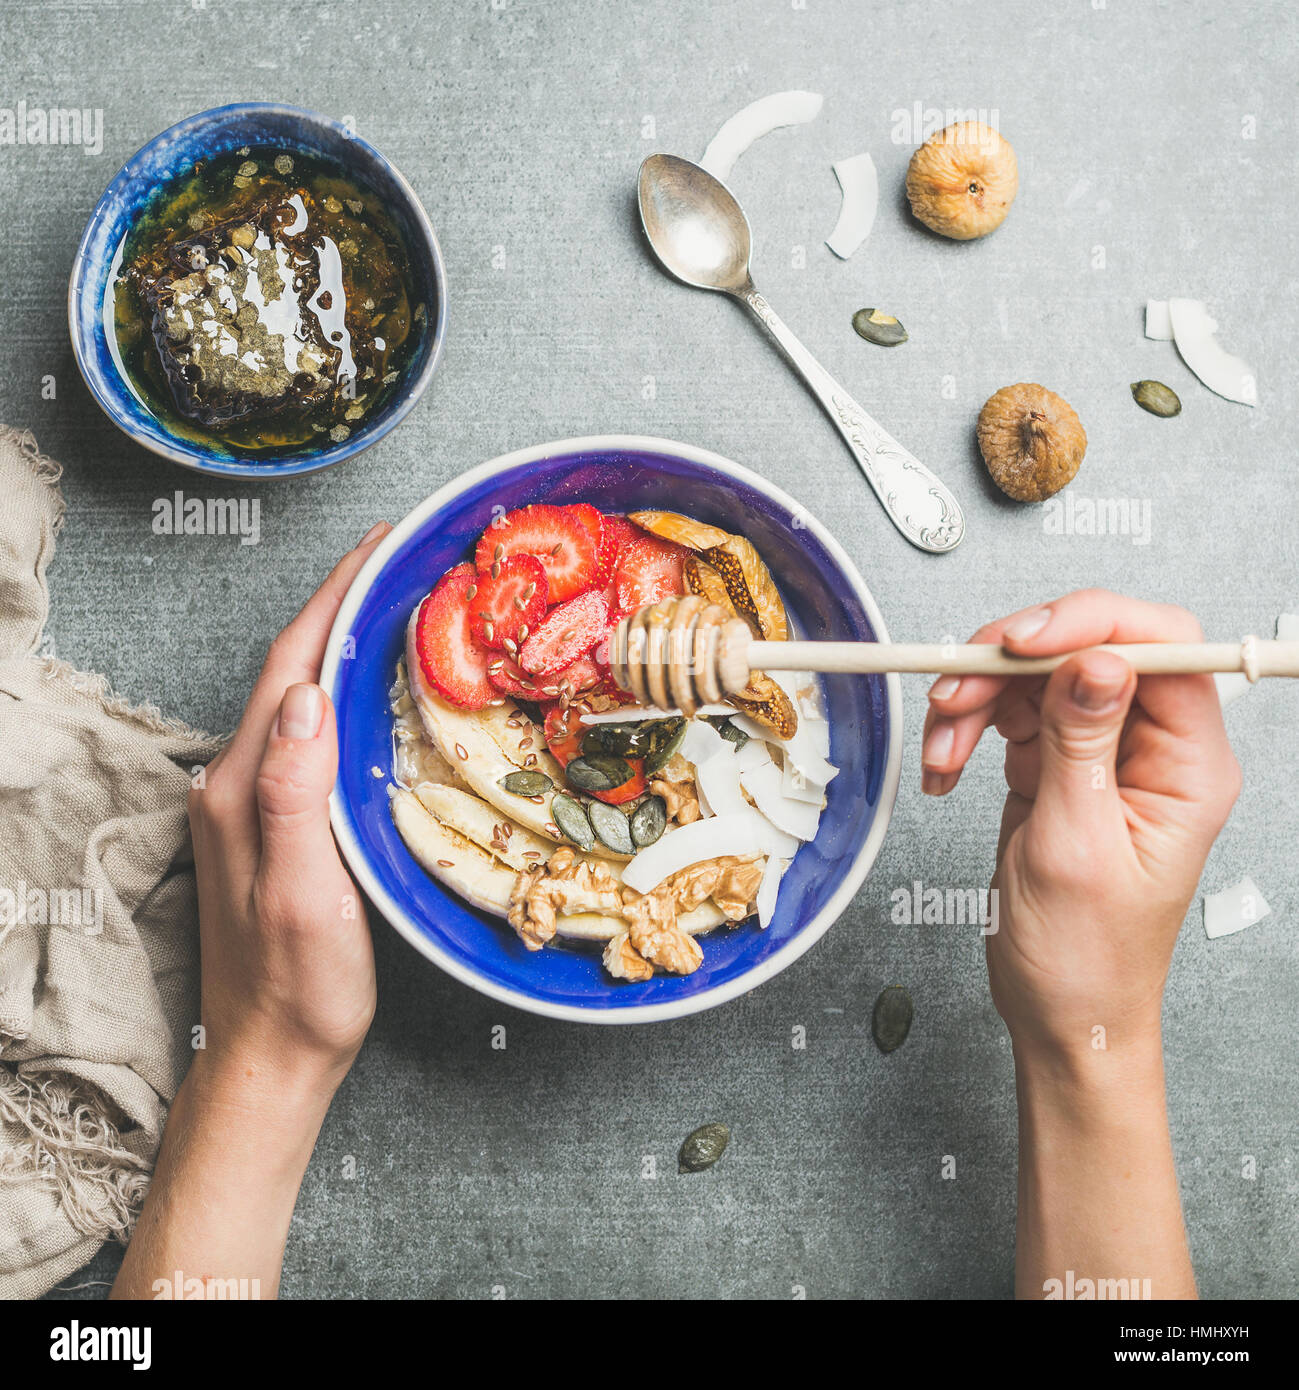 Blue bowl with healthy vegetarian breakfast in woman's hands Stock Photo